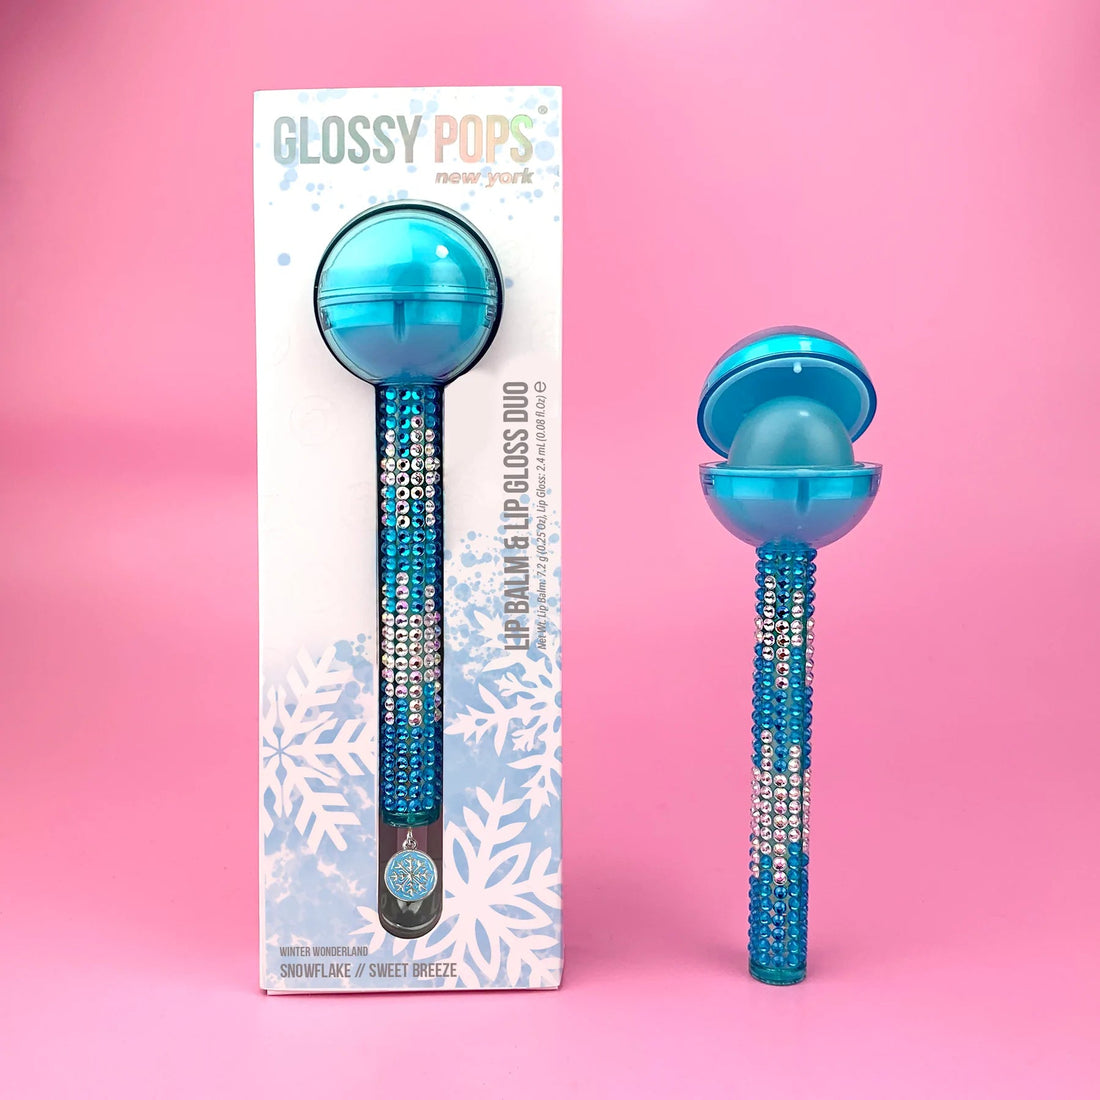 Shop Glossy Pops Christmas Snowflake - Premium Lip Gloss from Glossy Pops Online now at Spoiled Brat 